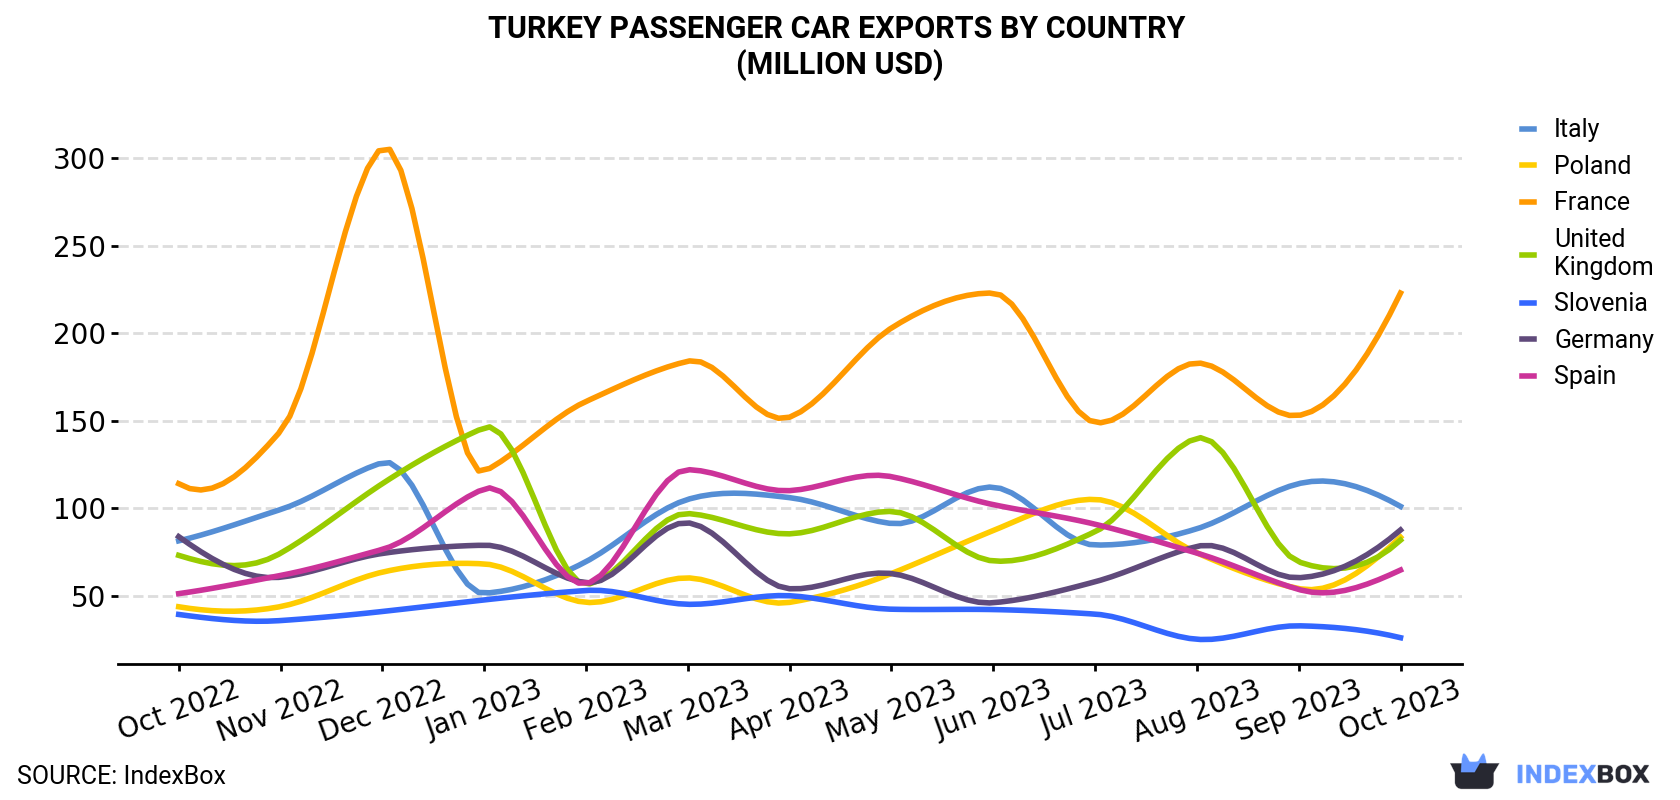 Turkey Passenger Car Exports By Country (Million USD)